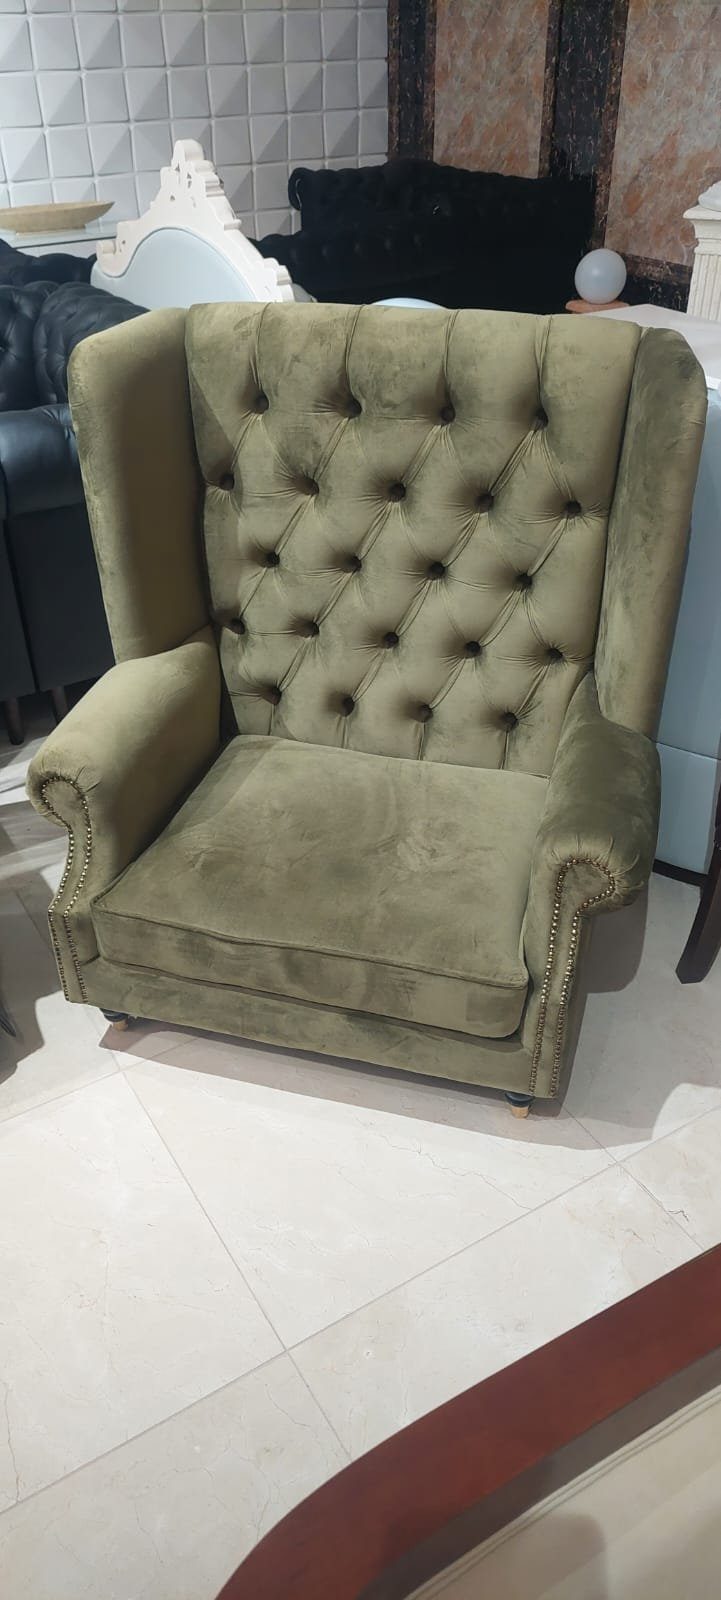 Sofort, 1 JVmoebel Couch Chesterfield Design Stoff in Chesterfield-Sessel Europa Polster Sessel Made Sitzer